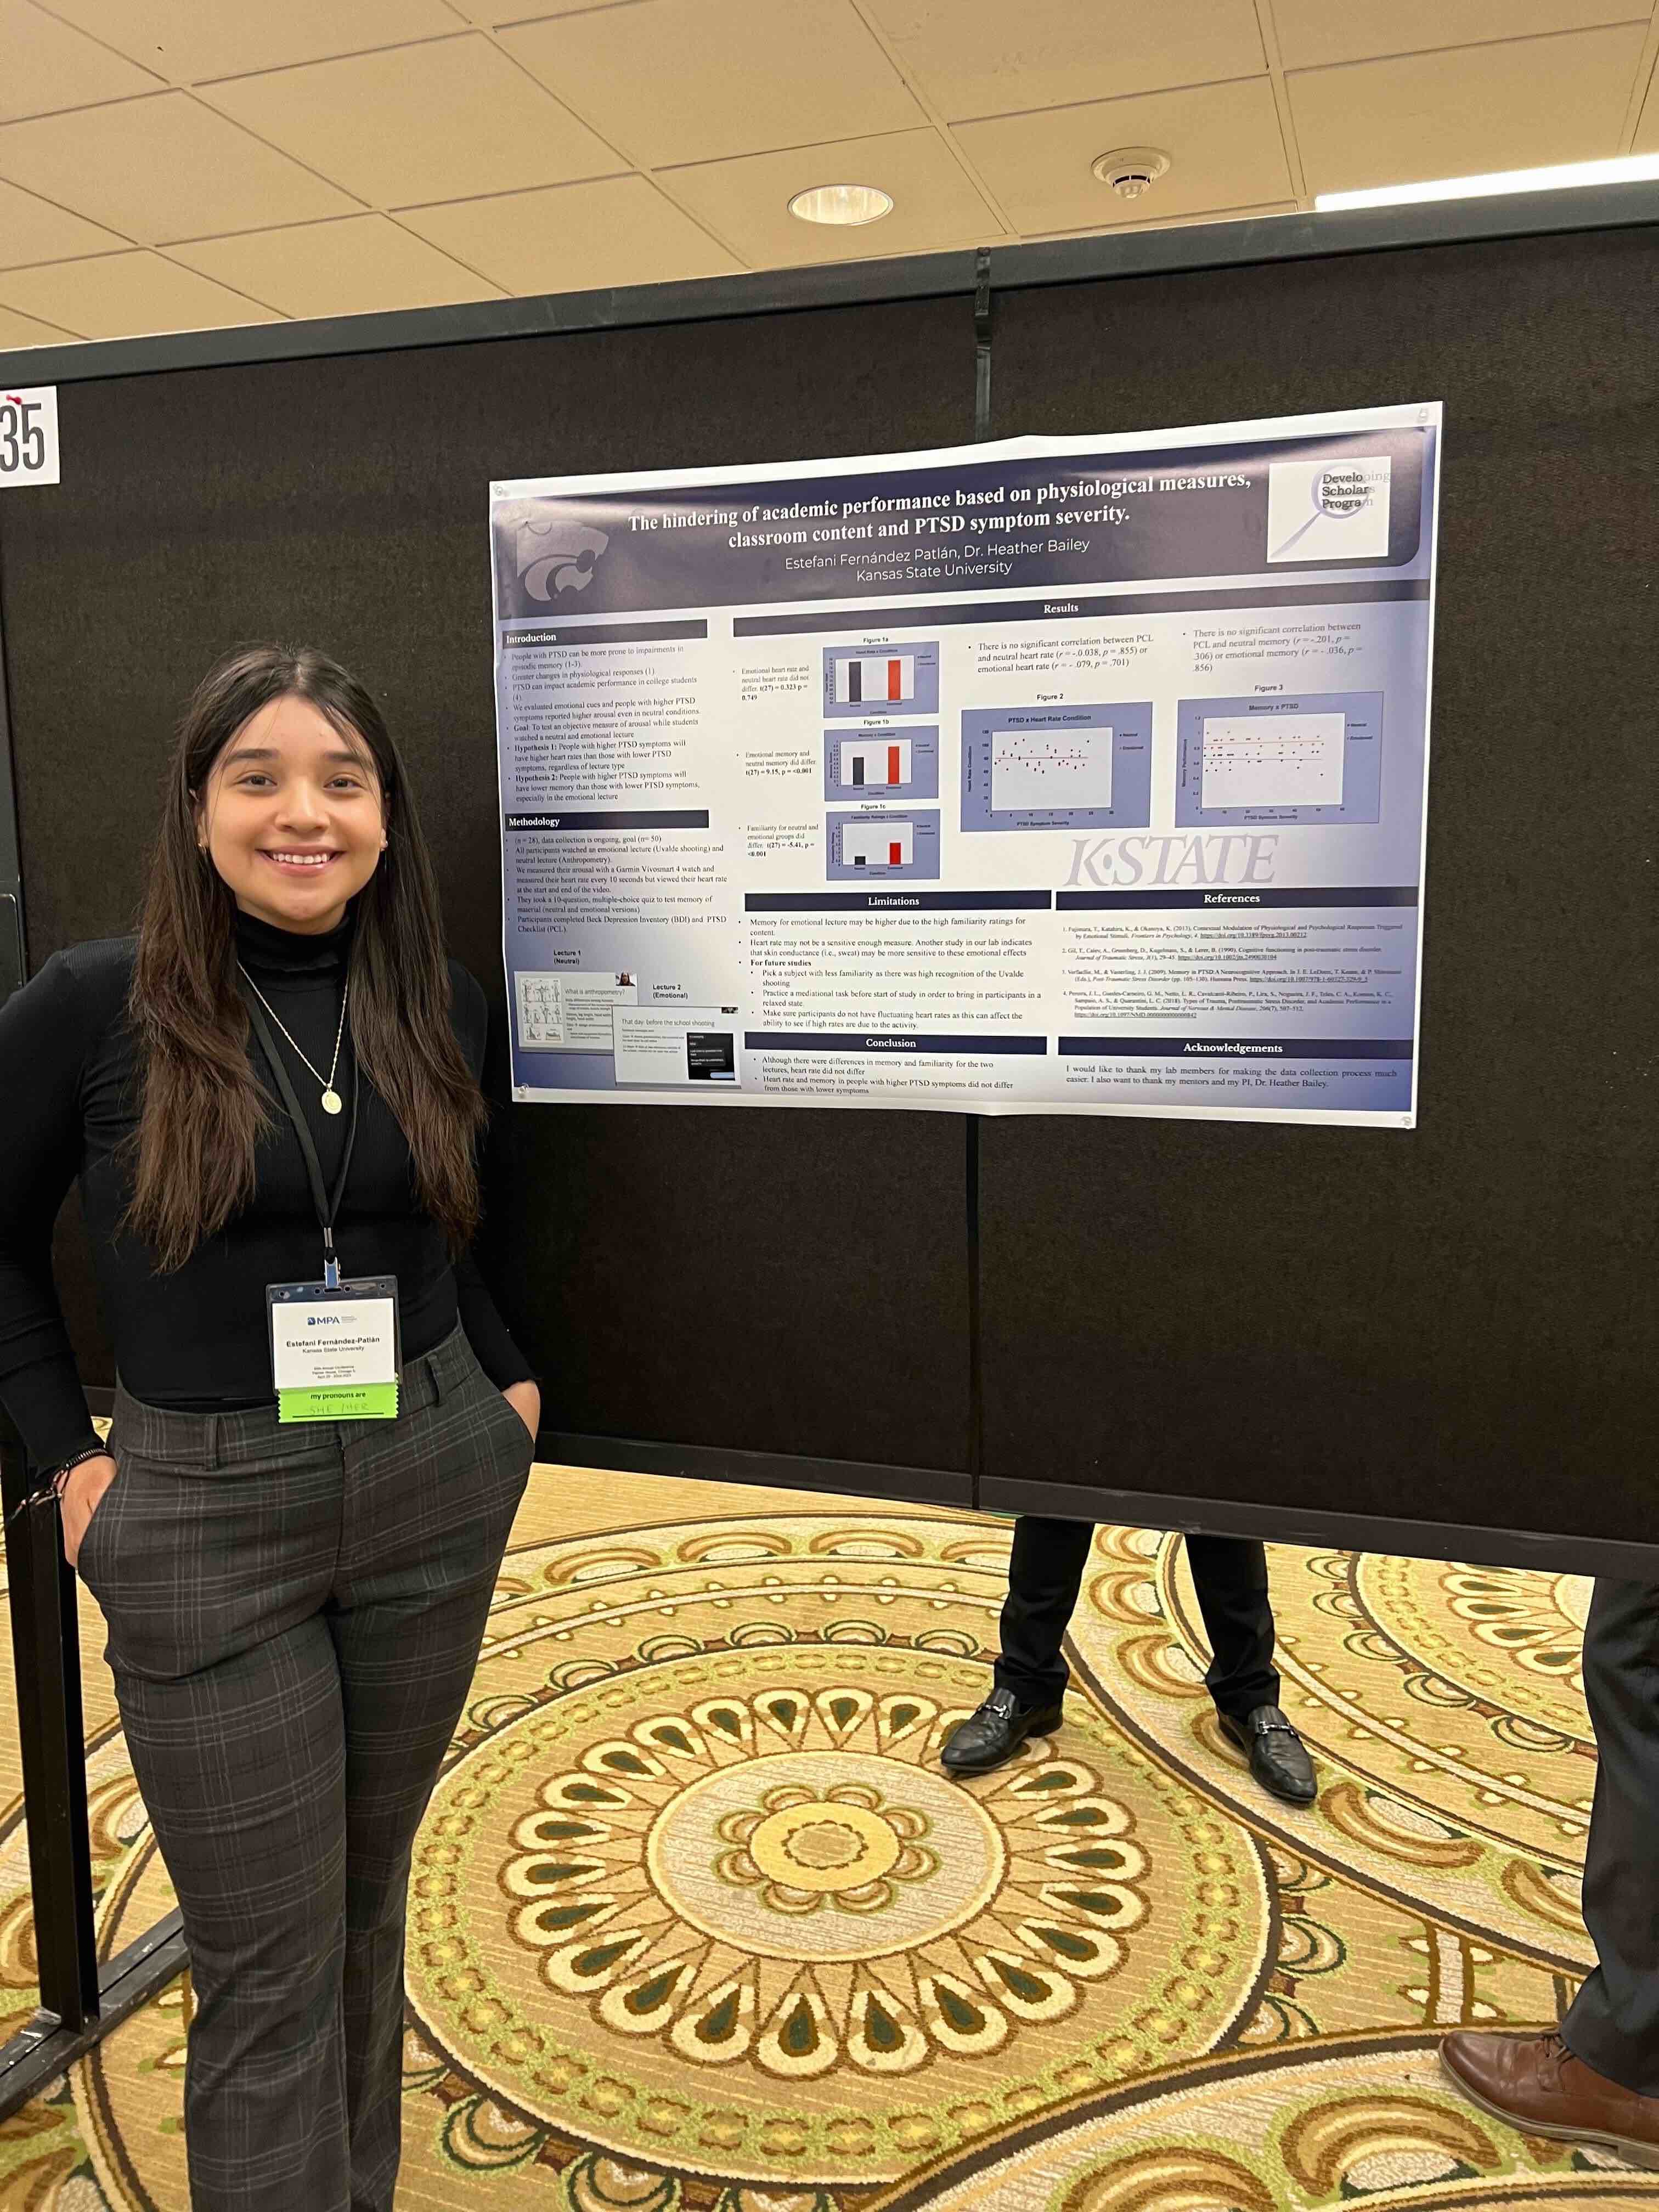 Estefani is presenting her poster titled "The hindering of academic performance based on physiological measures, classroom content and PTSD symptom severity."